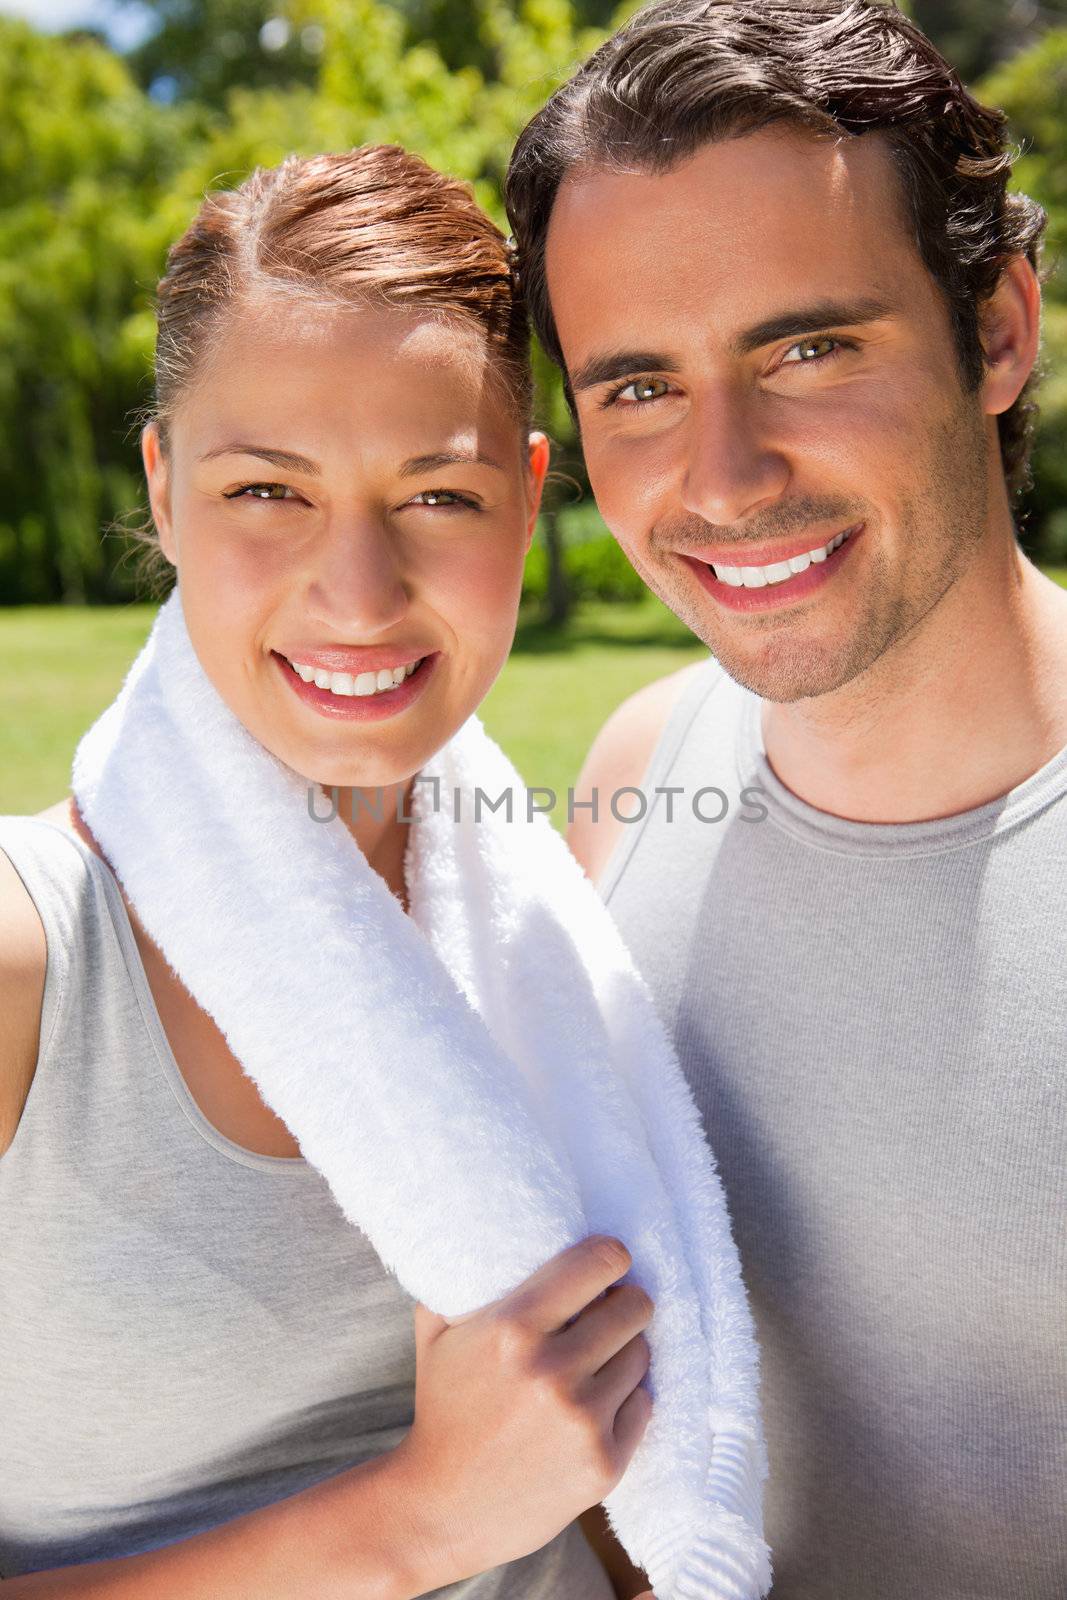 Woman holding a towel smiling with a man by Wavebreakmedia